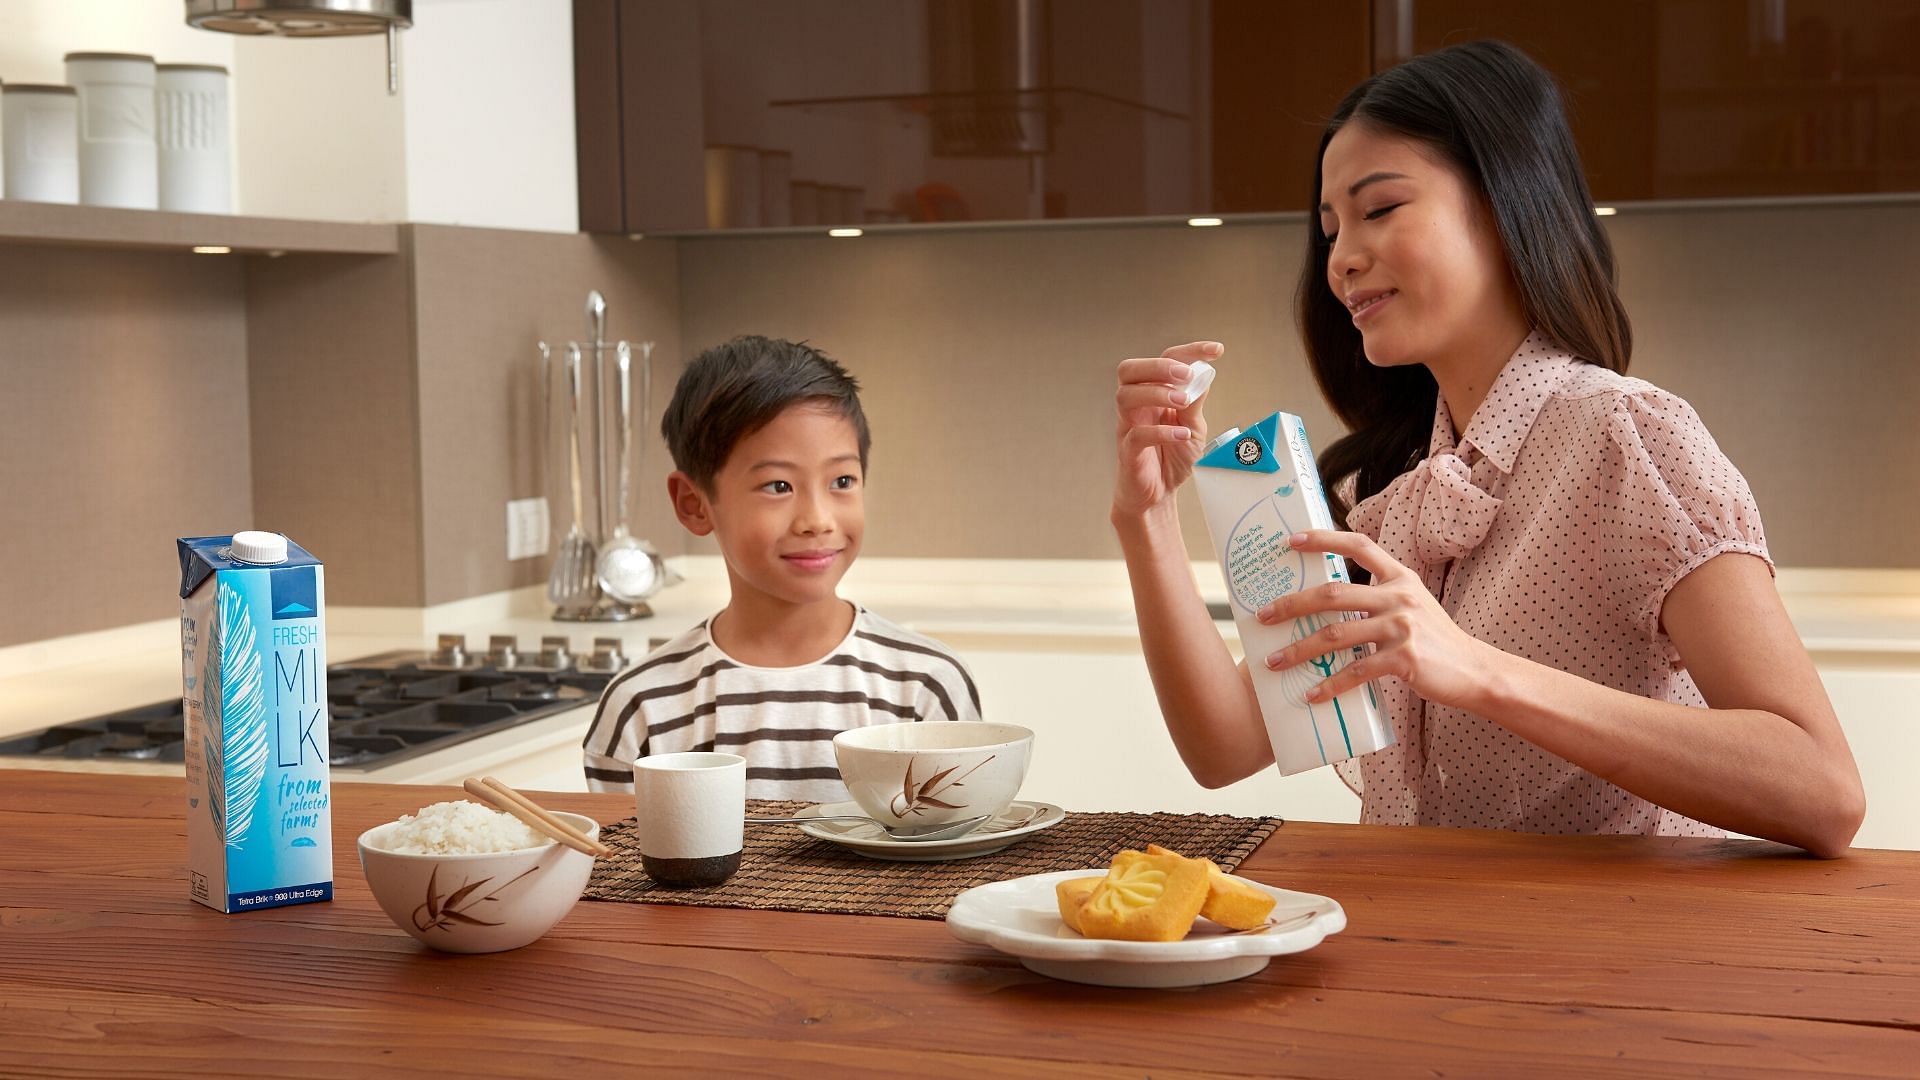 When are you switching to milk in Tetra Pak cartons?